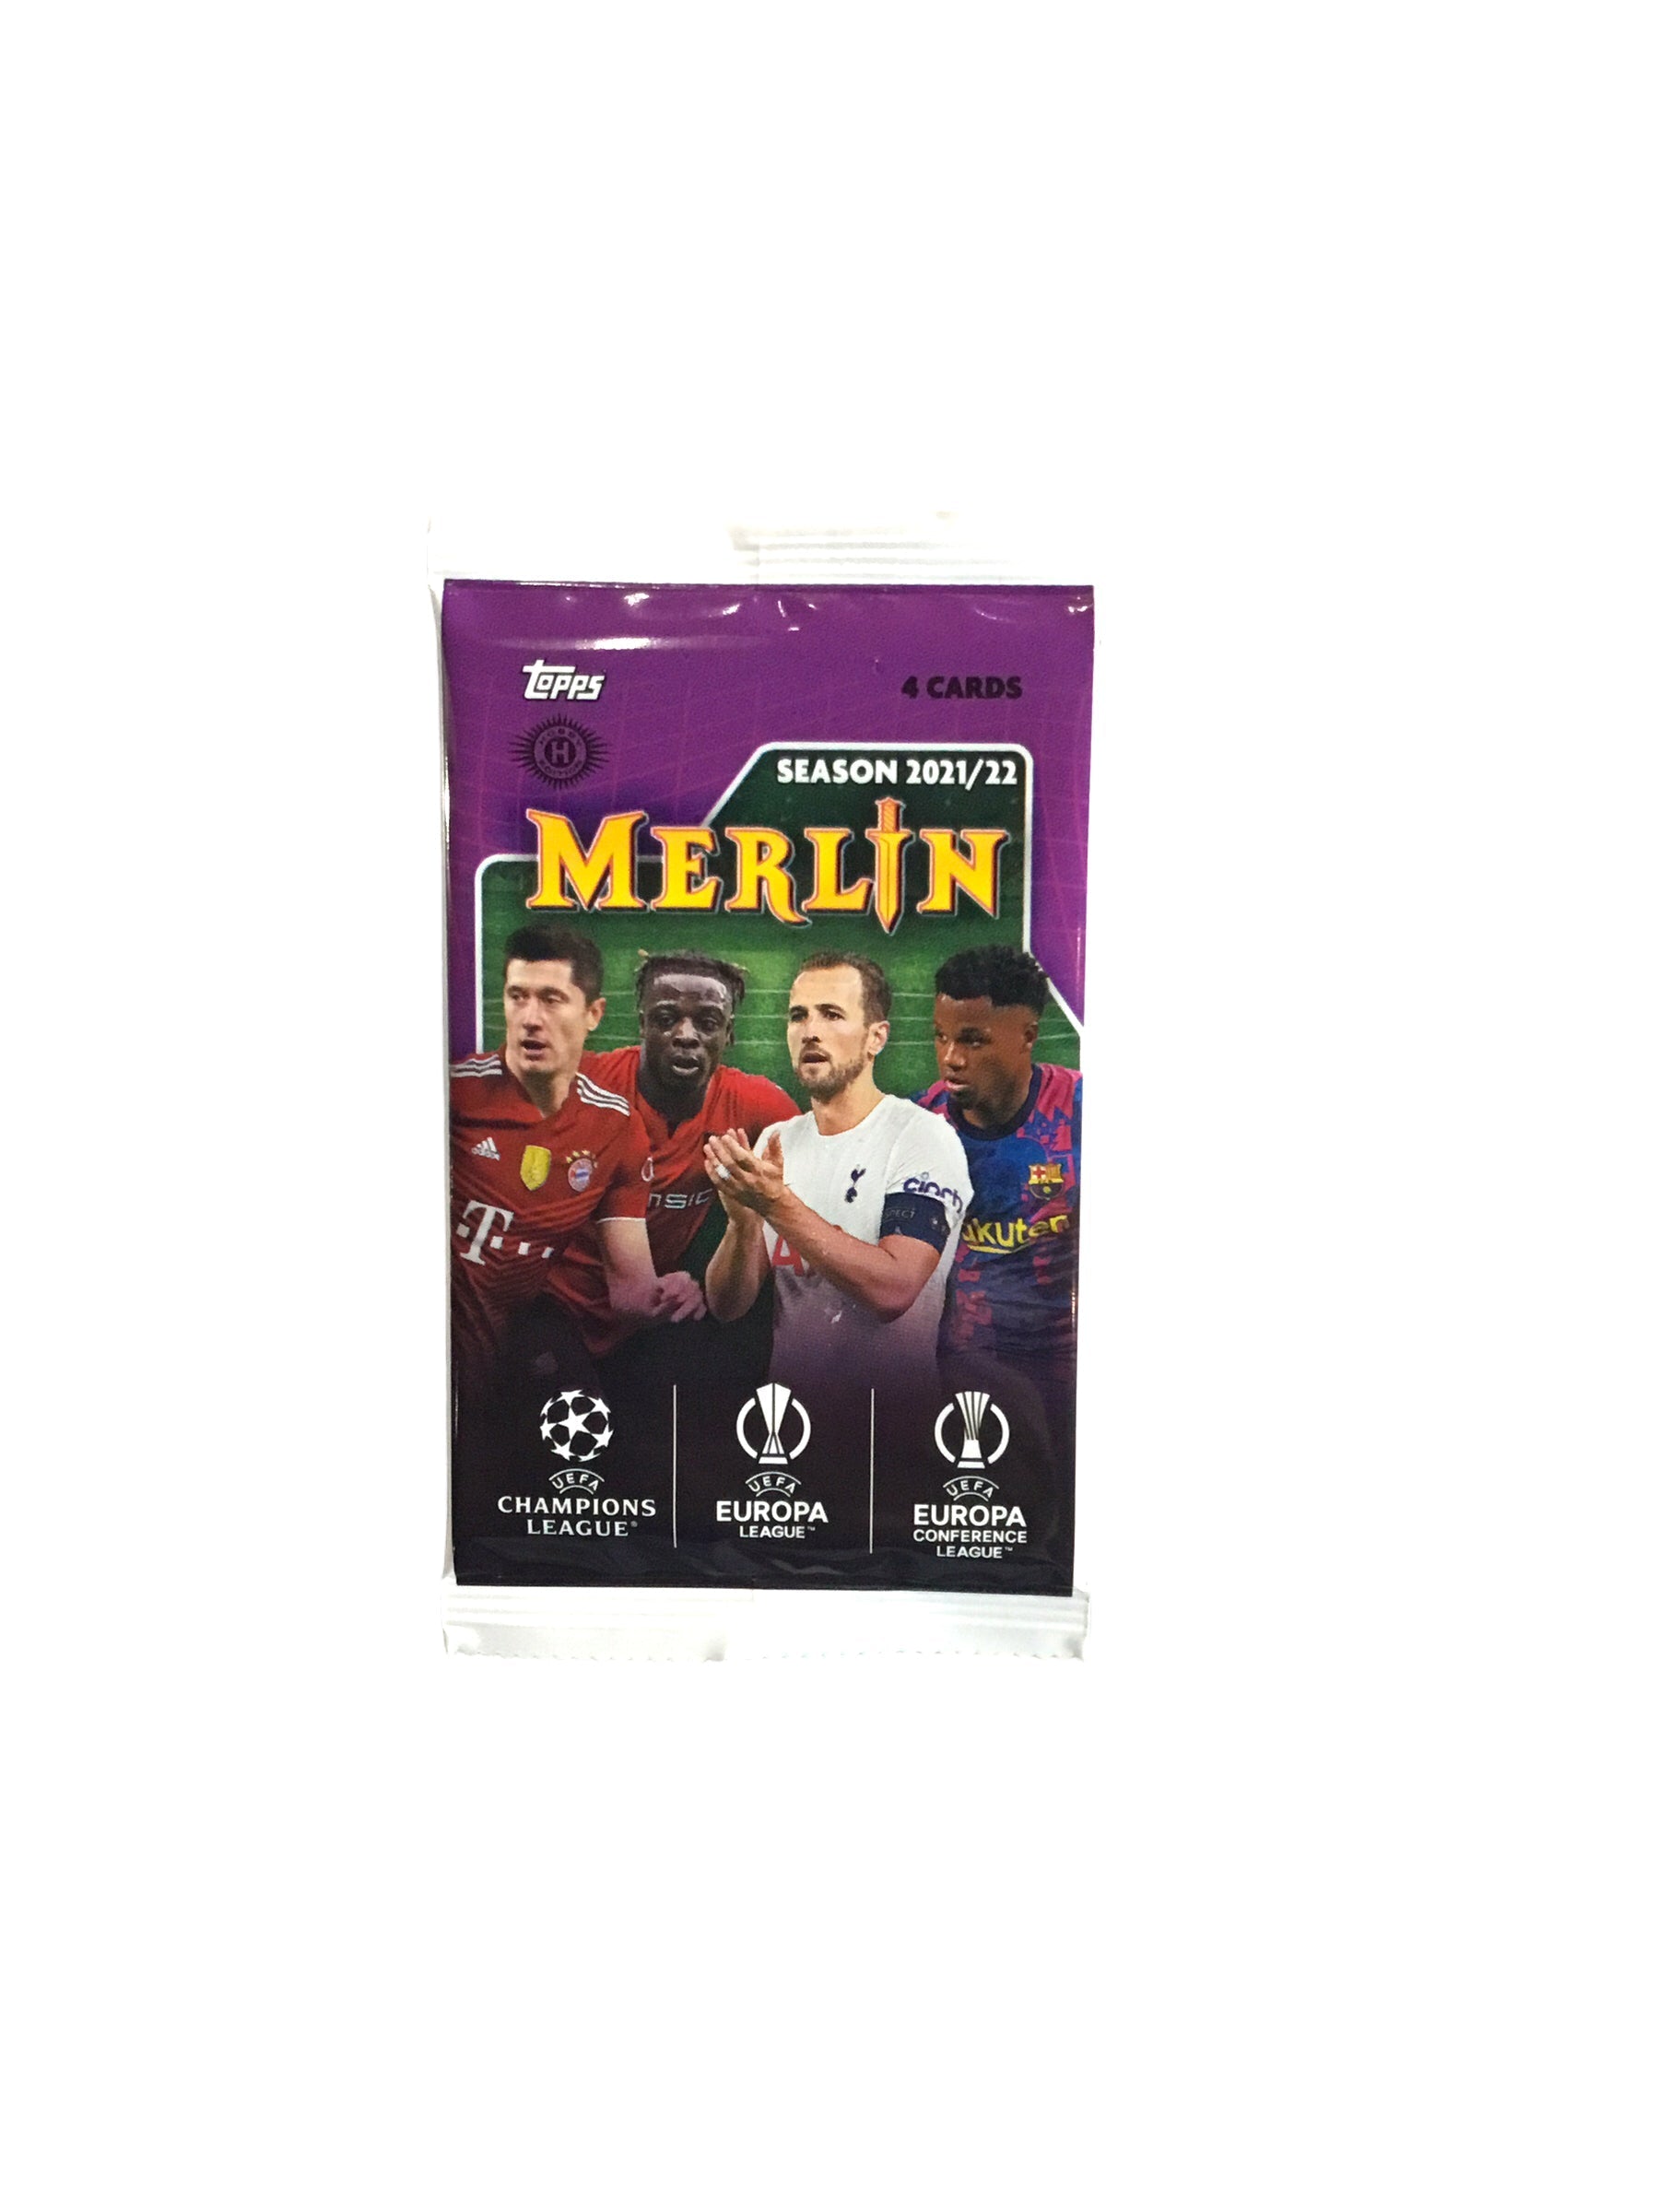 2021-22 Topps Merlin Hobby Box 1 Chrome Autograph Guaranteed on Average 4 Card Single Pack